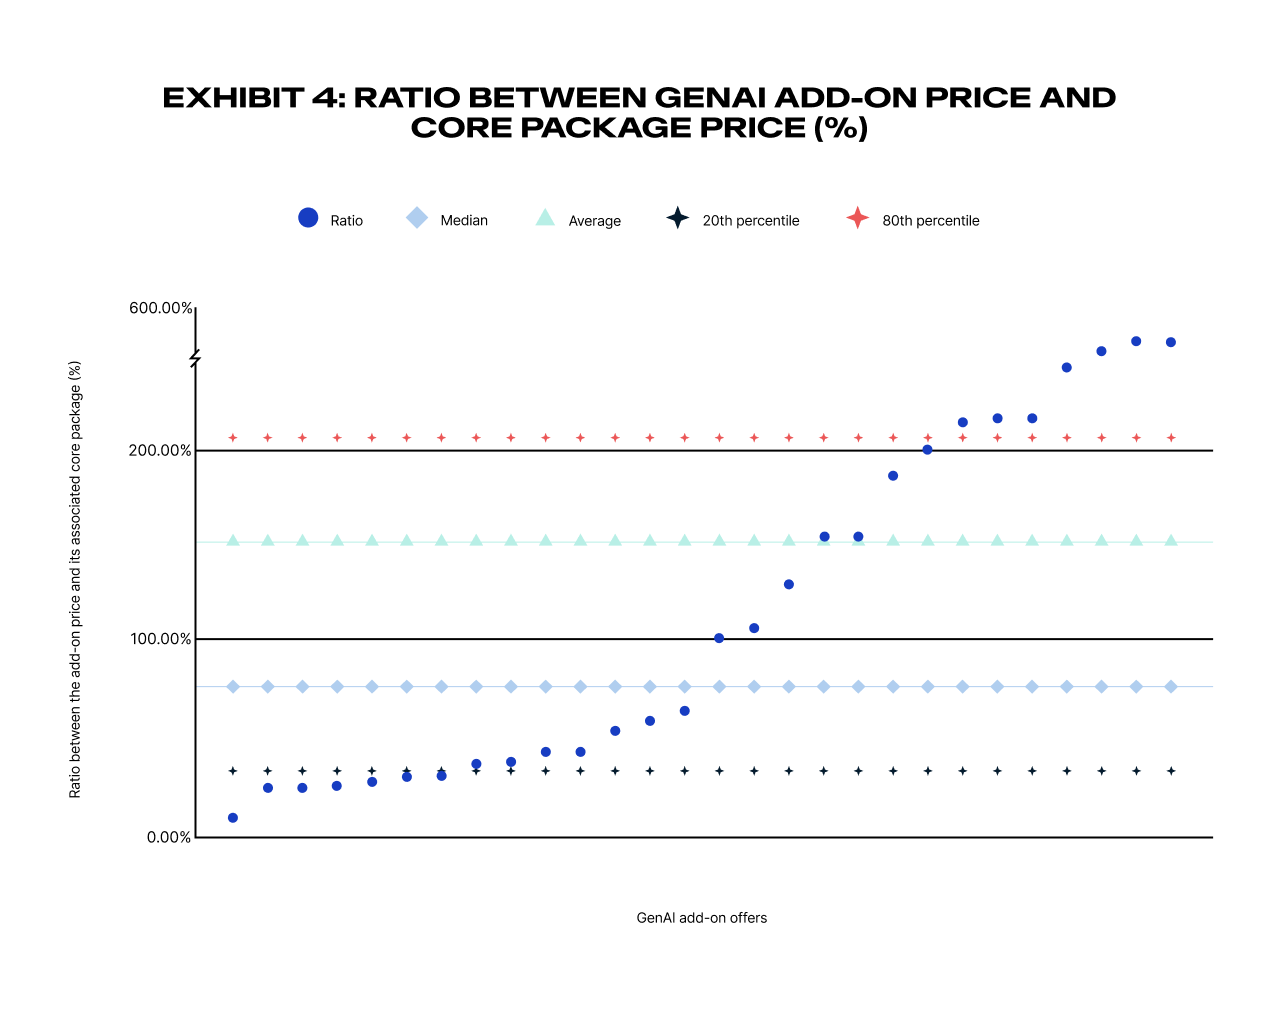 Graph titled "Exhibit 4: Ratio Between GenAi Add-ons Price and Core Package Price (%)" with data points for median, average, 20th percentile, and 80th percentile.